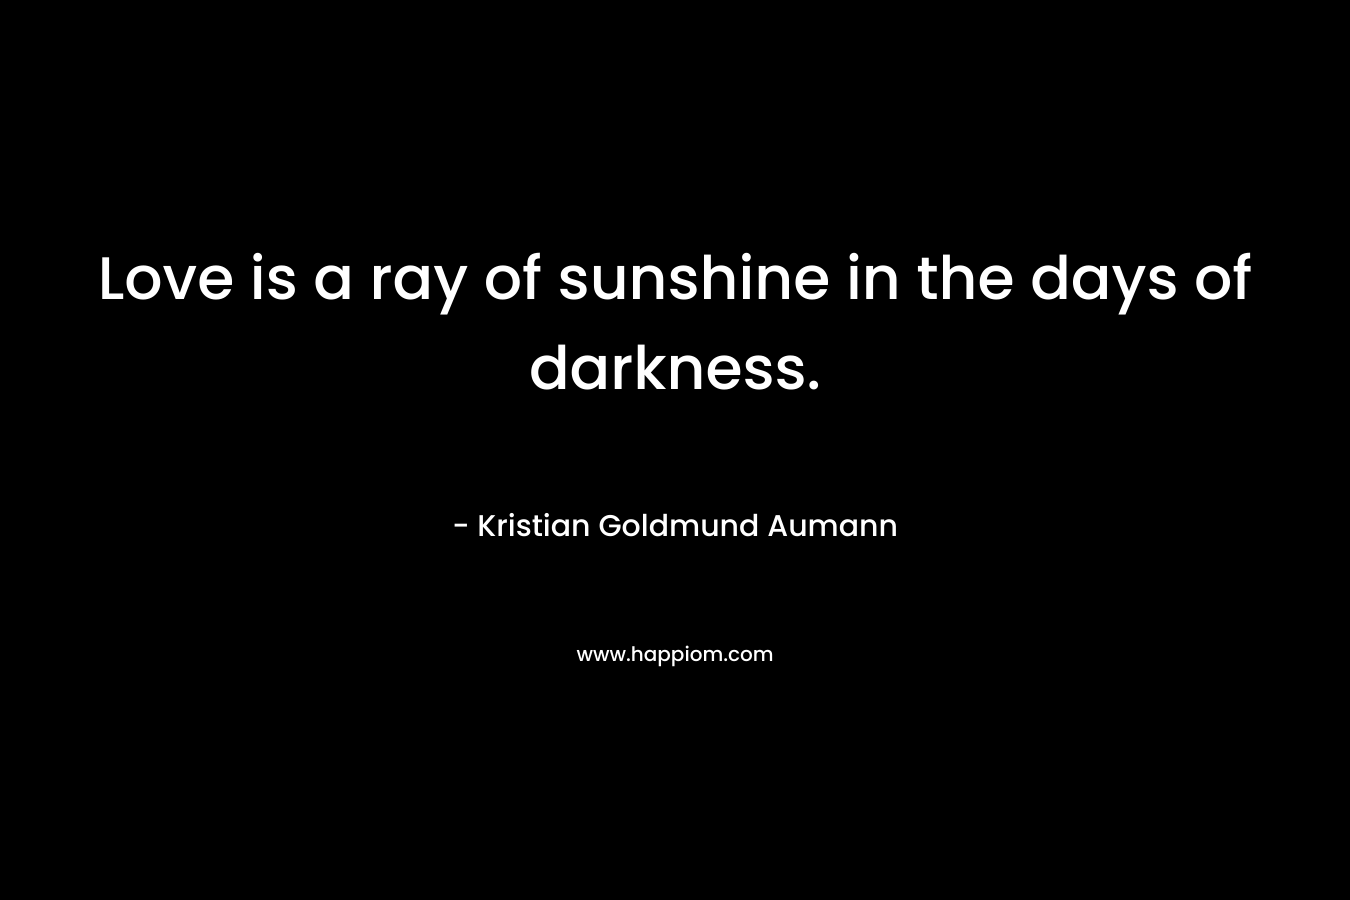 Love is a ray of sunshine in the days of darkness.